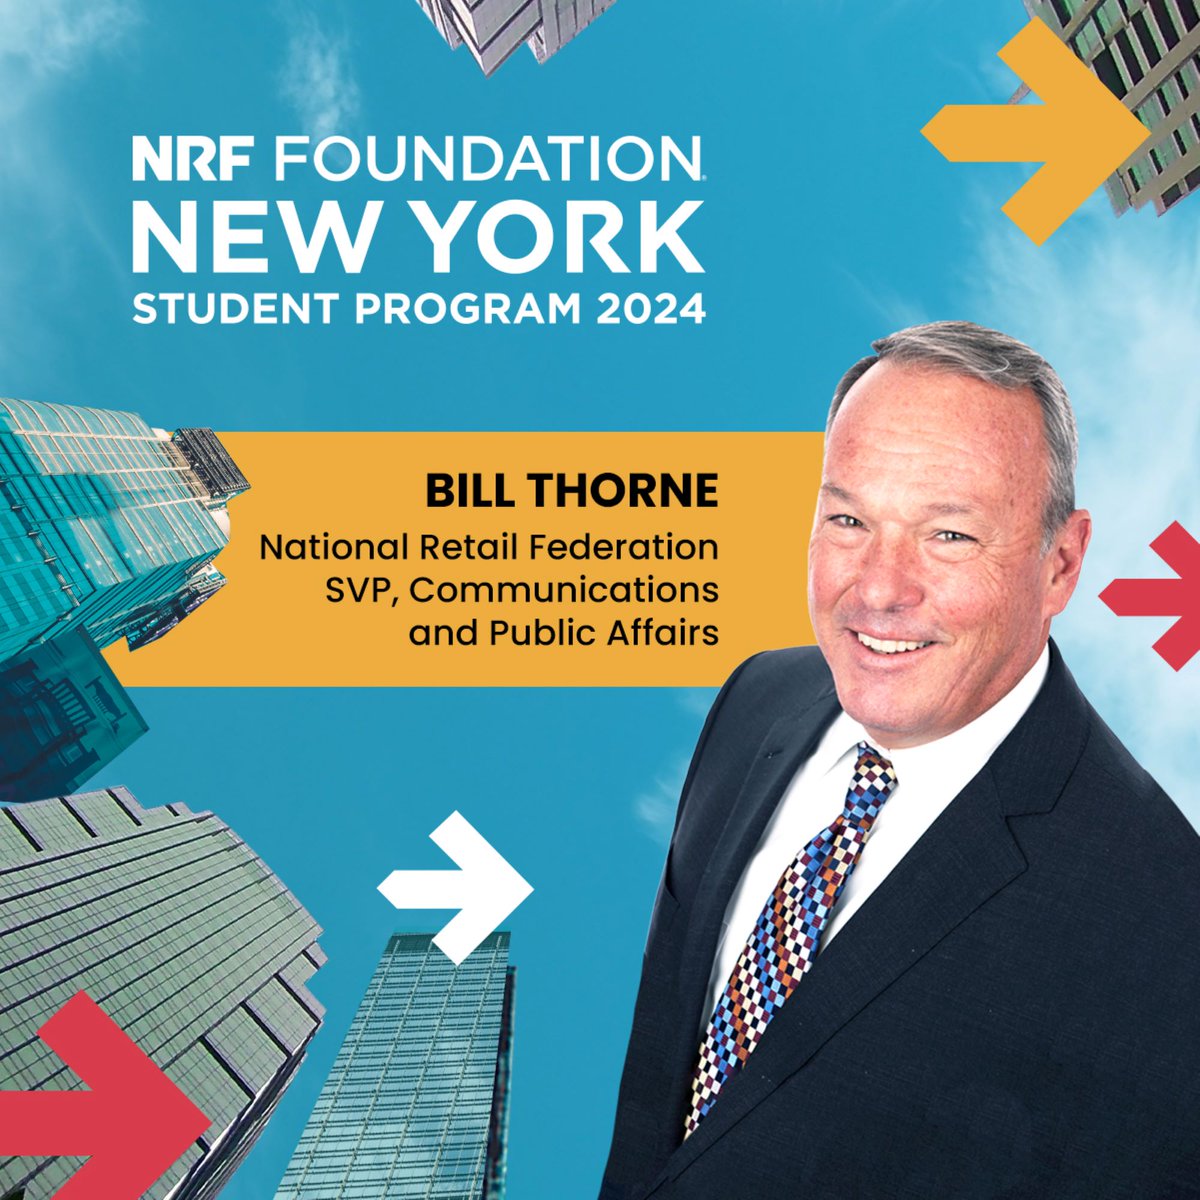 Join Monica and Andy founder and CEO Monica Royer and NRF's SVP of Communications Bill Thorne for a live podcast recording during the NRF Foundation Student Program 2024. Don't miss the chance to be part of an episode of Retail Gets Real! Register: bit.ly/3kSrZW1